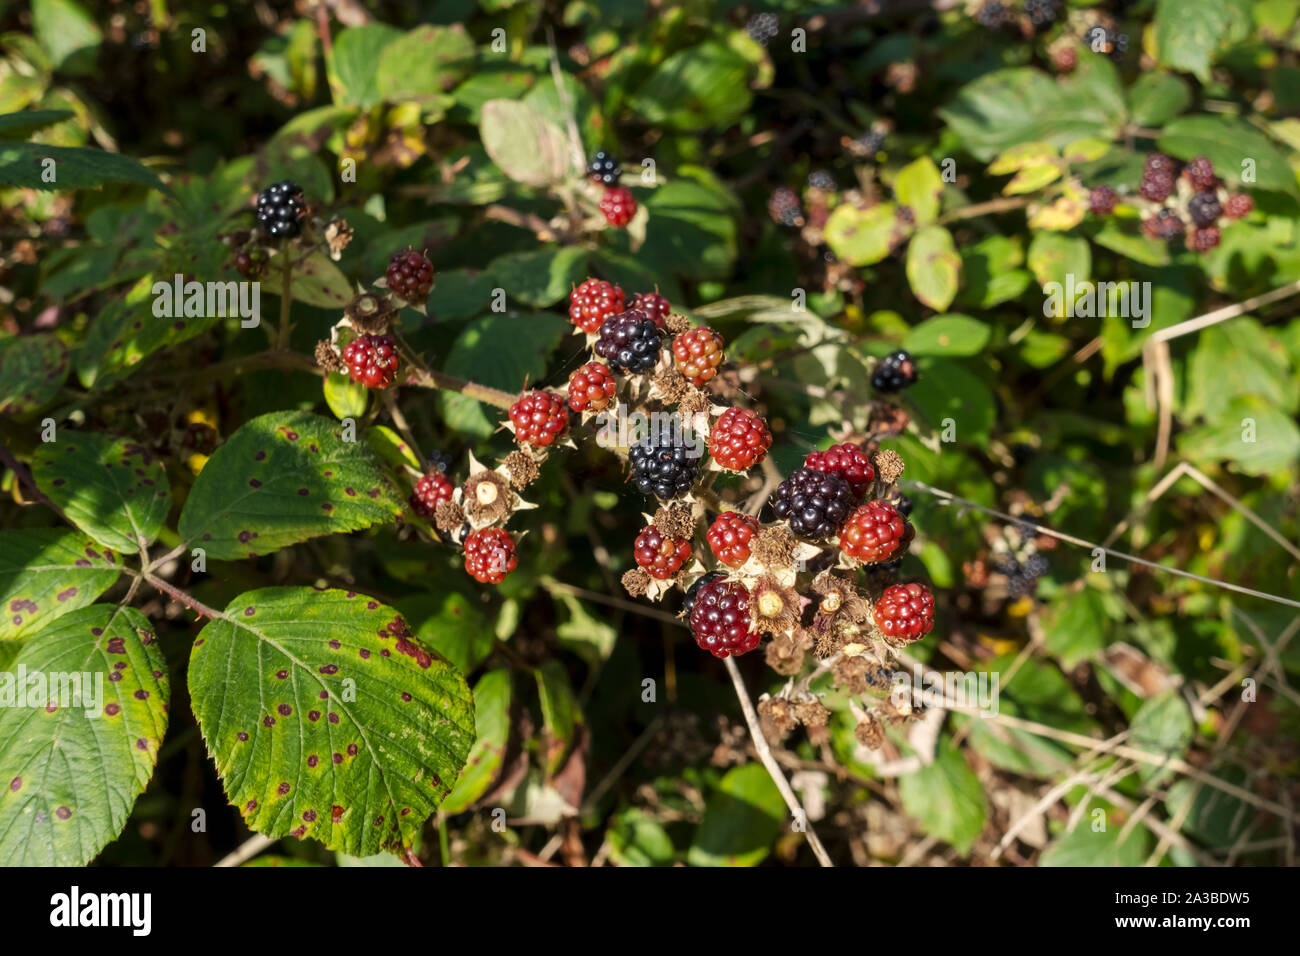 Close up of wild blackberries blackberry berries fruit fruits in a hedgerow  in autumn England UK United Kingdom GB Great Britain Stock Photo